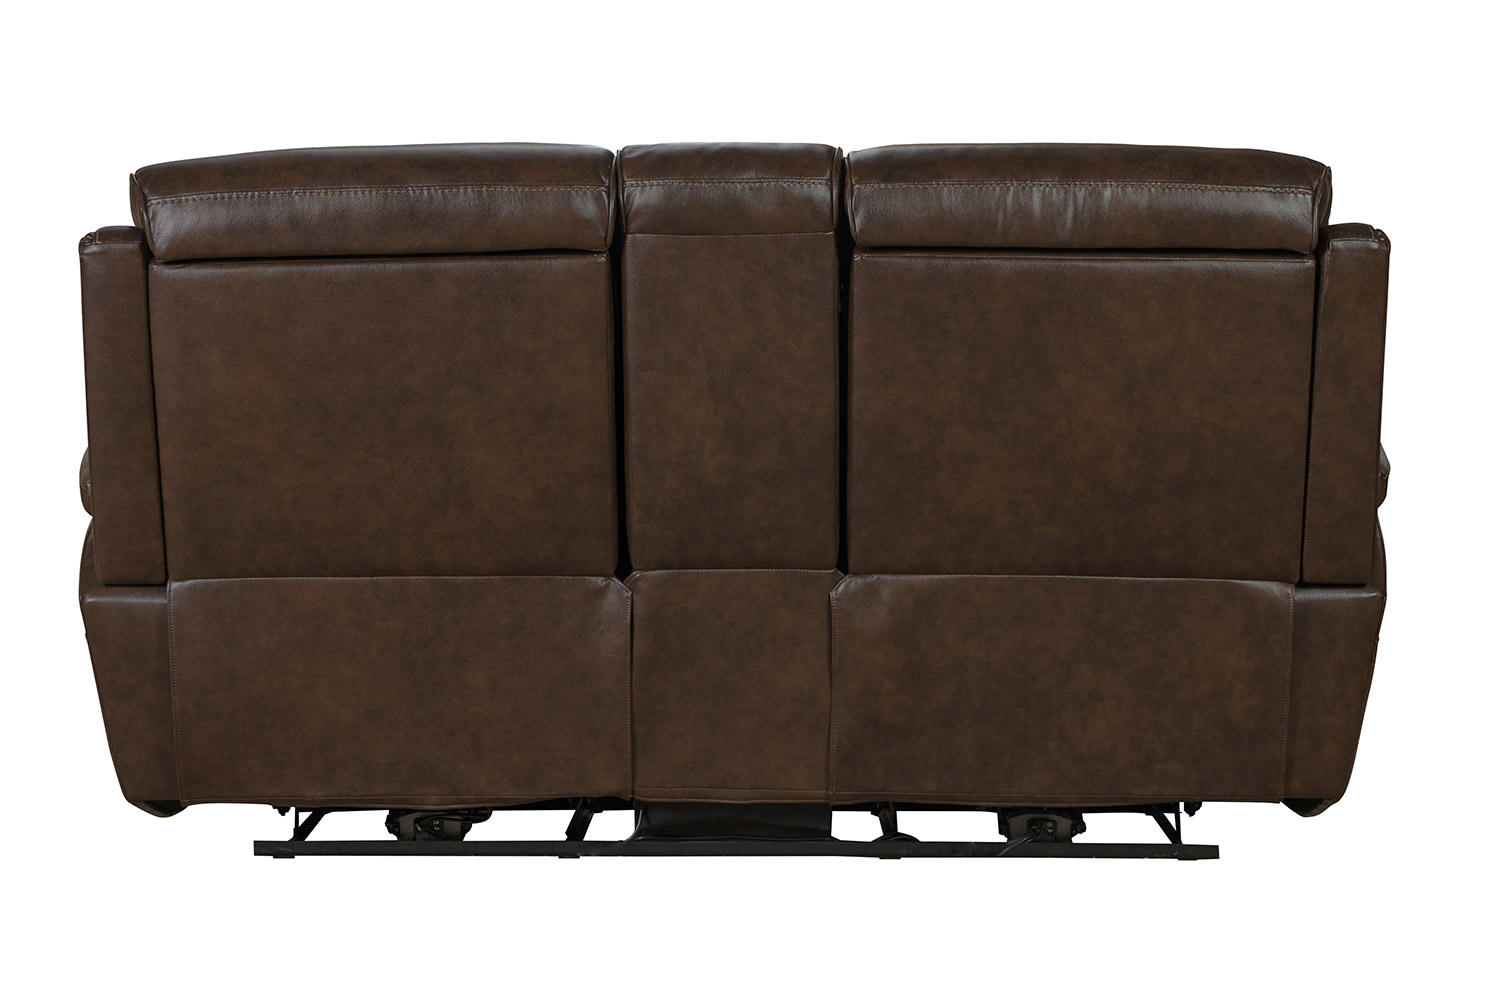 Barcalounger Sandover Power Reclining Console Loveseat with Power Head Rests and Lumbar - Tri-Tone Chocolate/Leather match